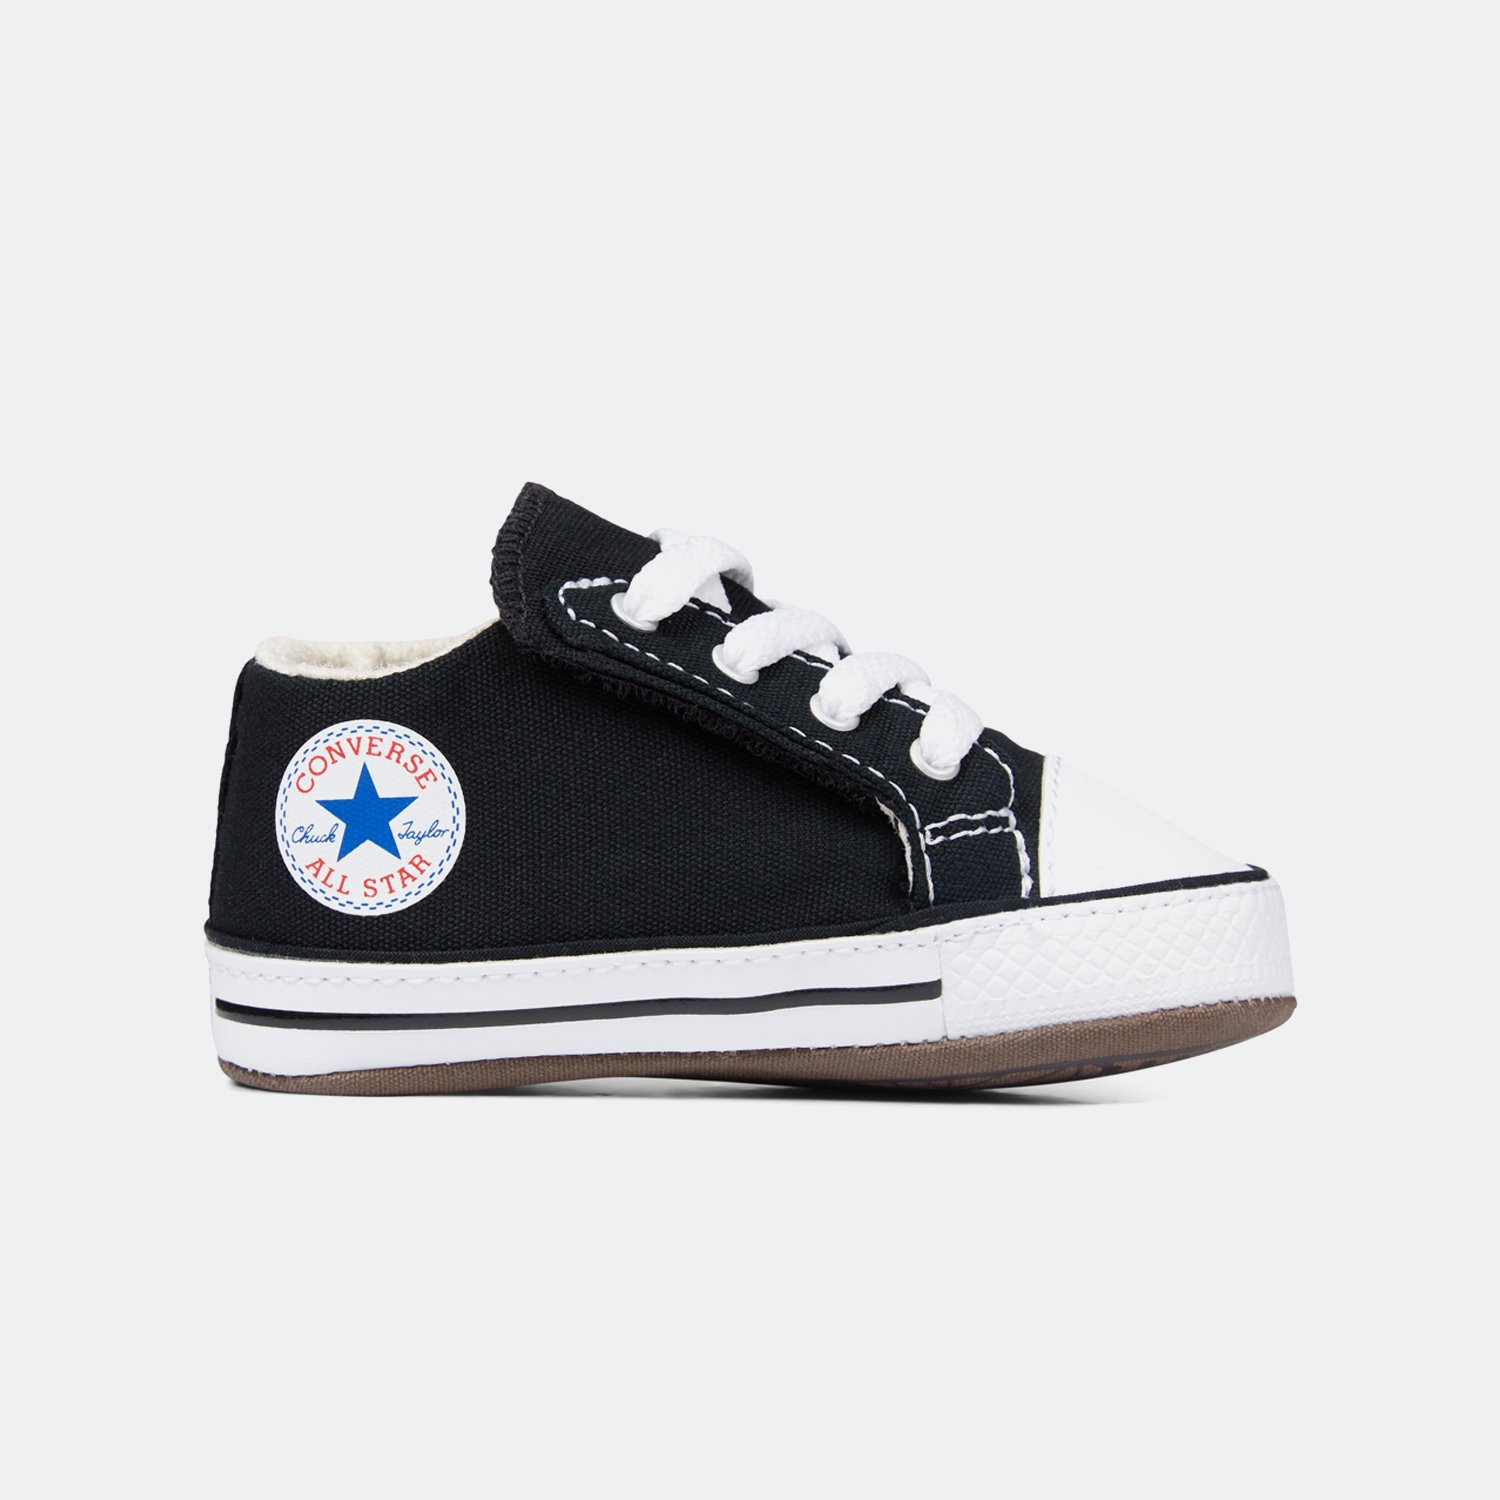 Converse Chuck Taylor All Star Βρεφικά Παπούτσια (9000039330_1469)